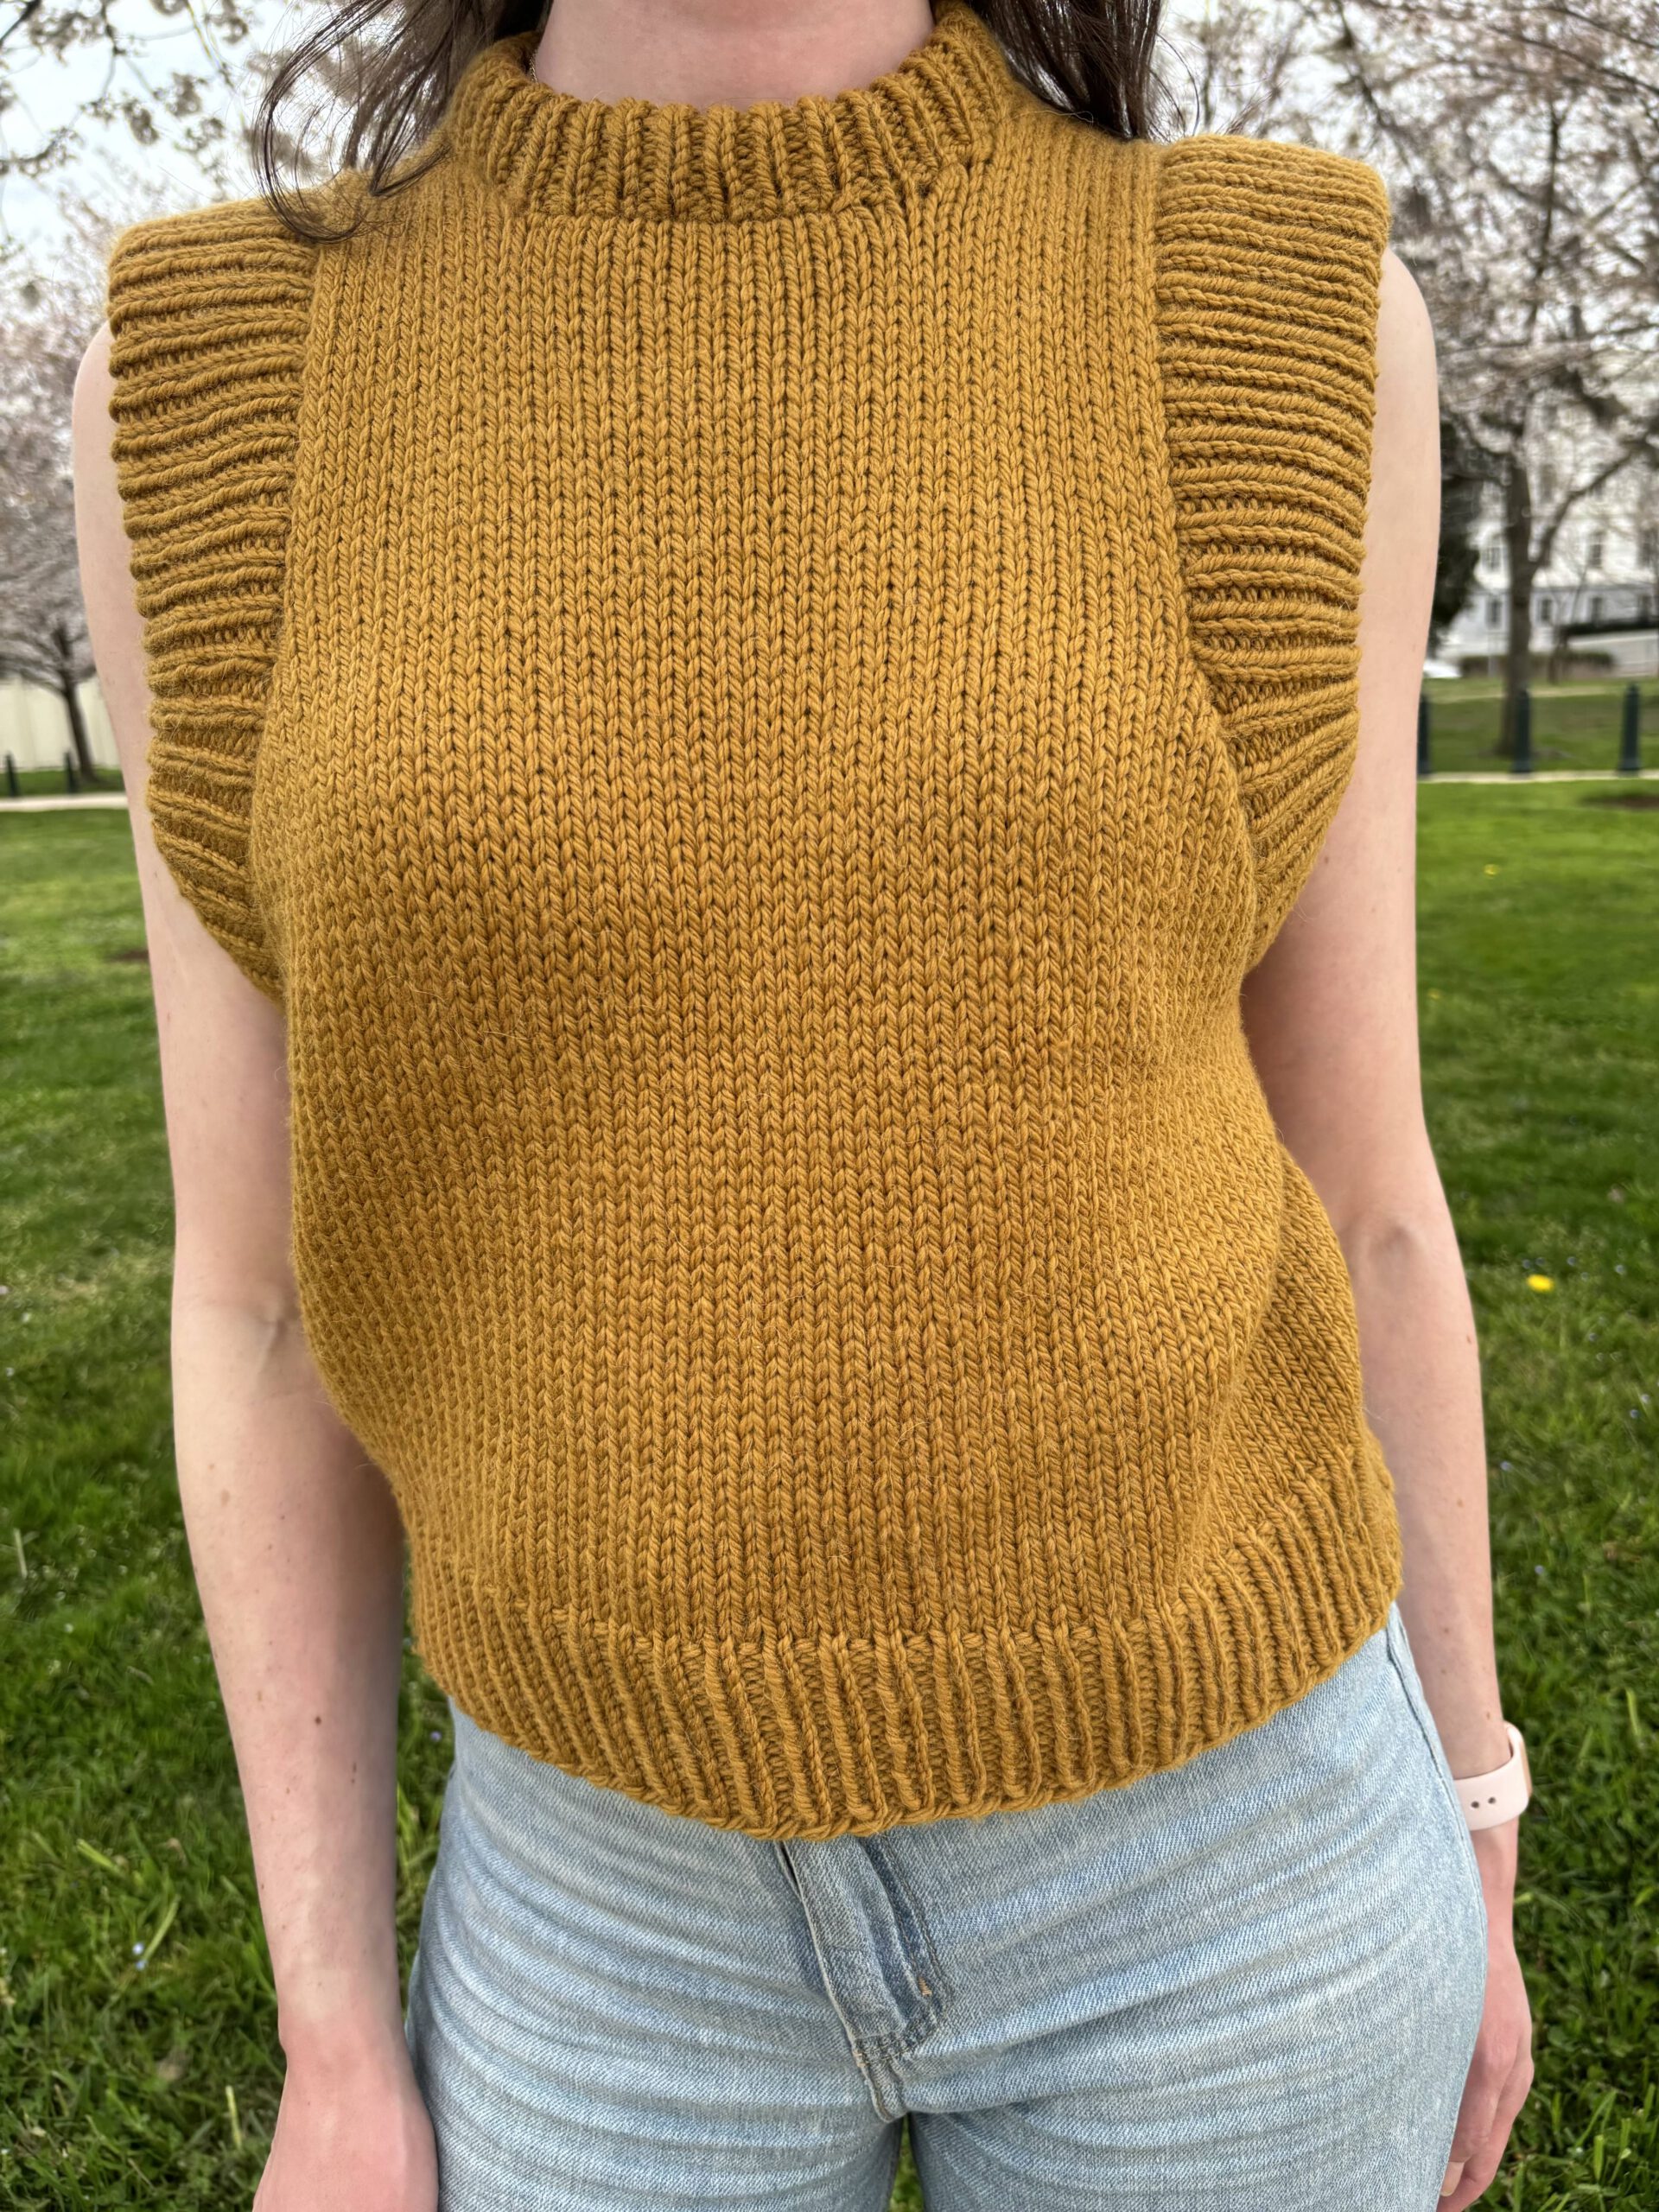 How to knit a vest